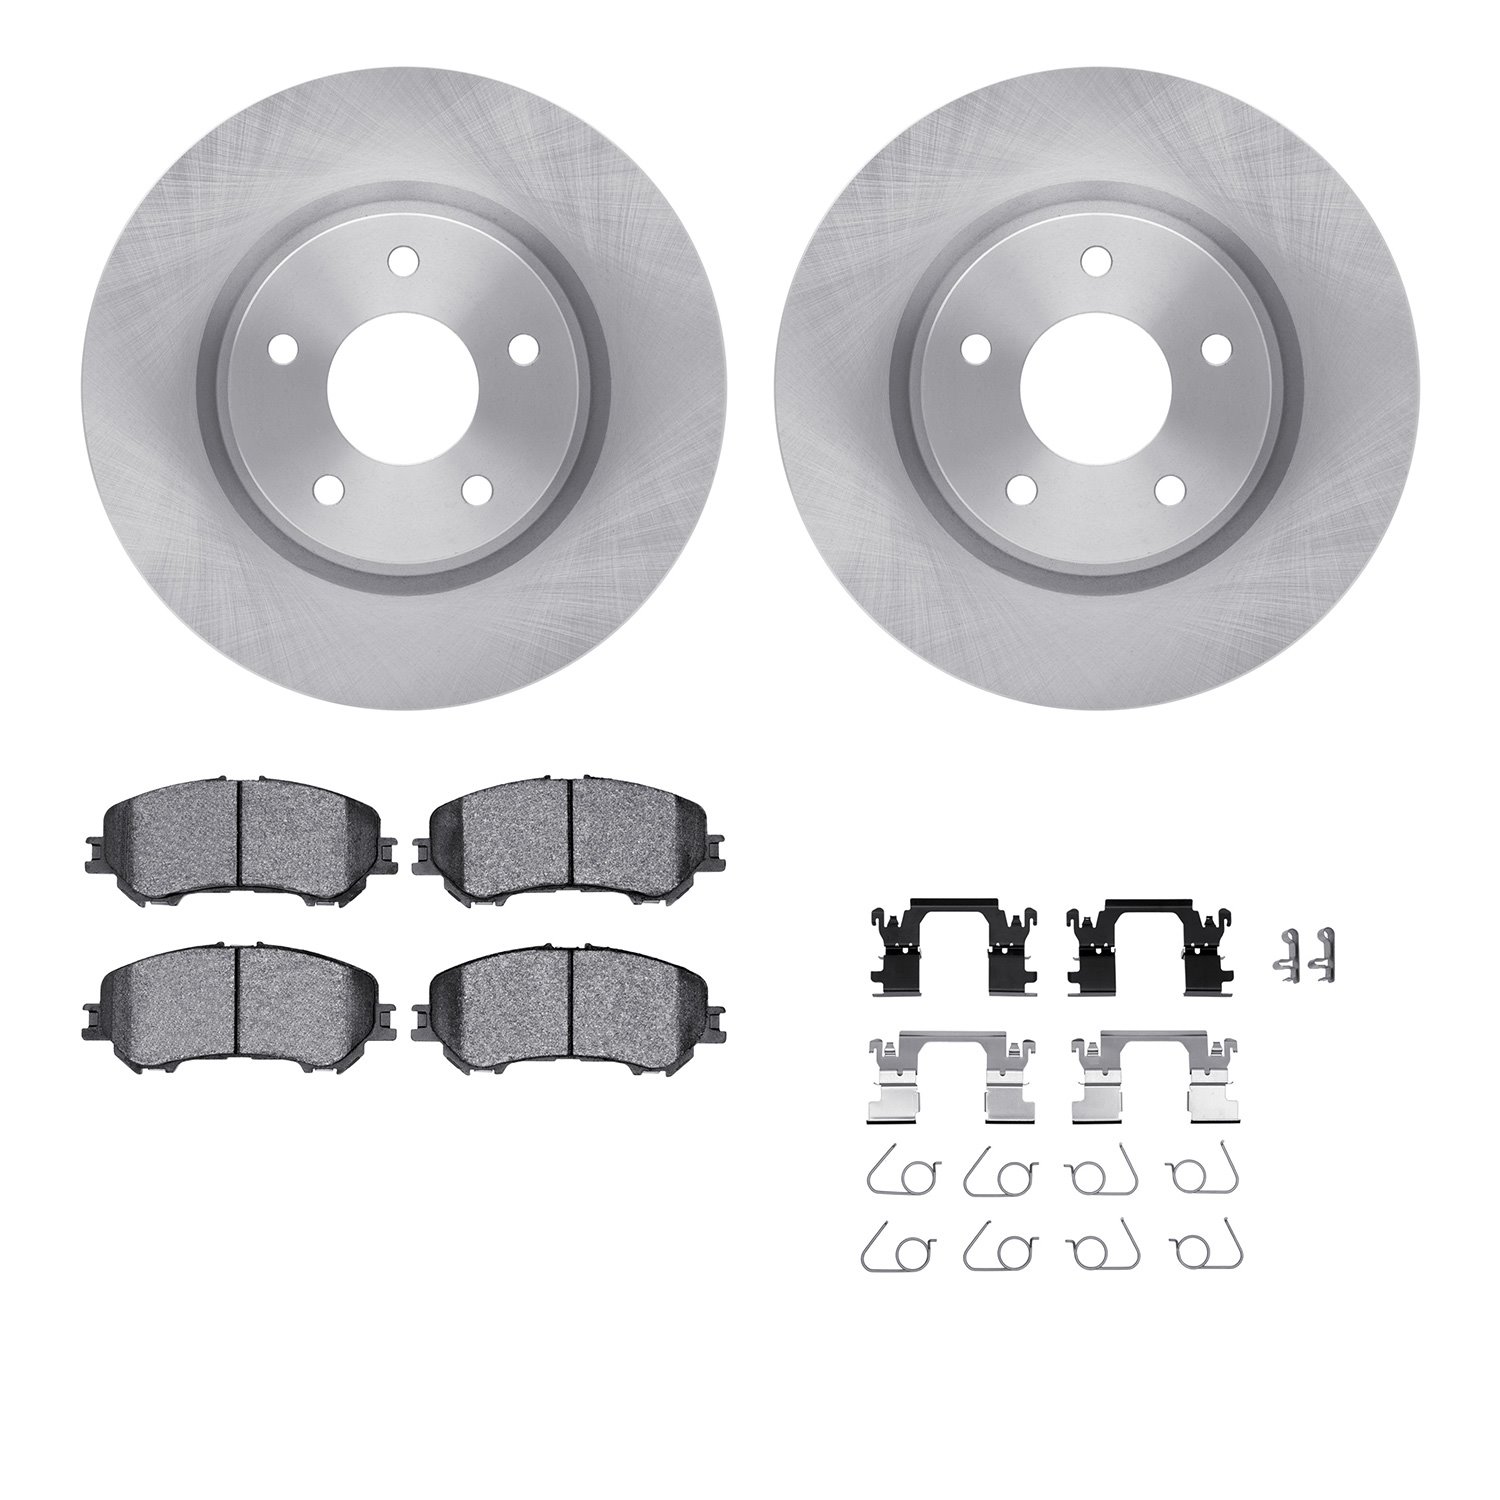 6312-67130 Brake Rotors with 3000-Series Ceramic Brake Pads Kit with Hardware, Fits Select Multiple Makes/Models, Position: Fron